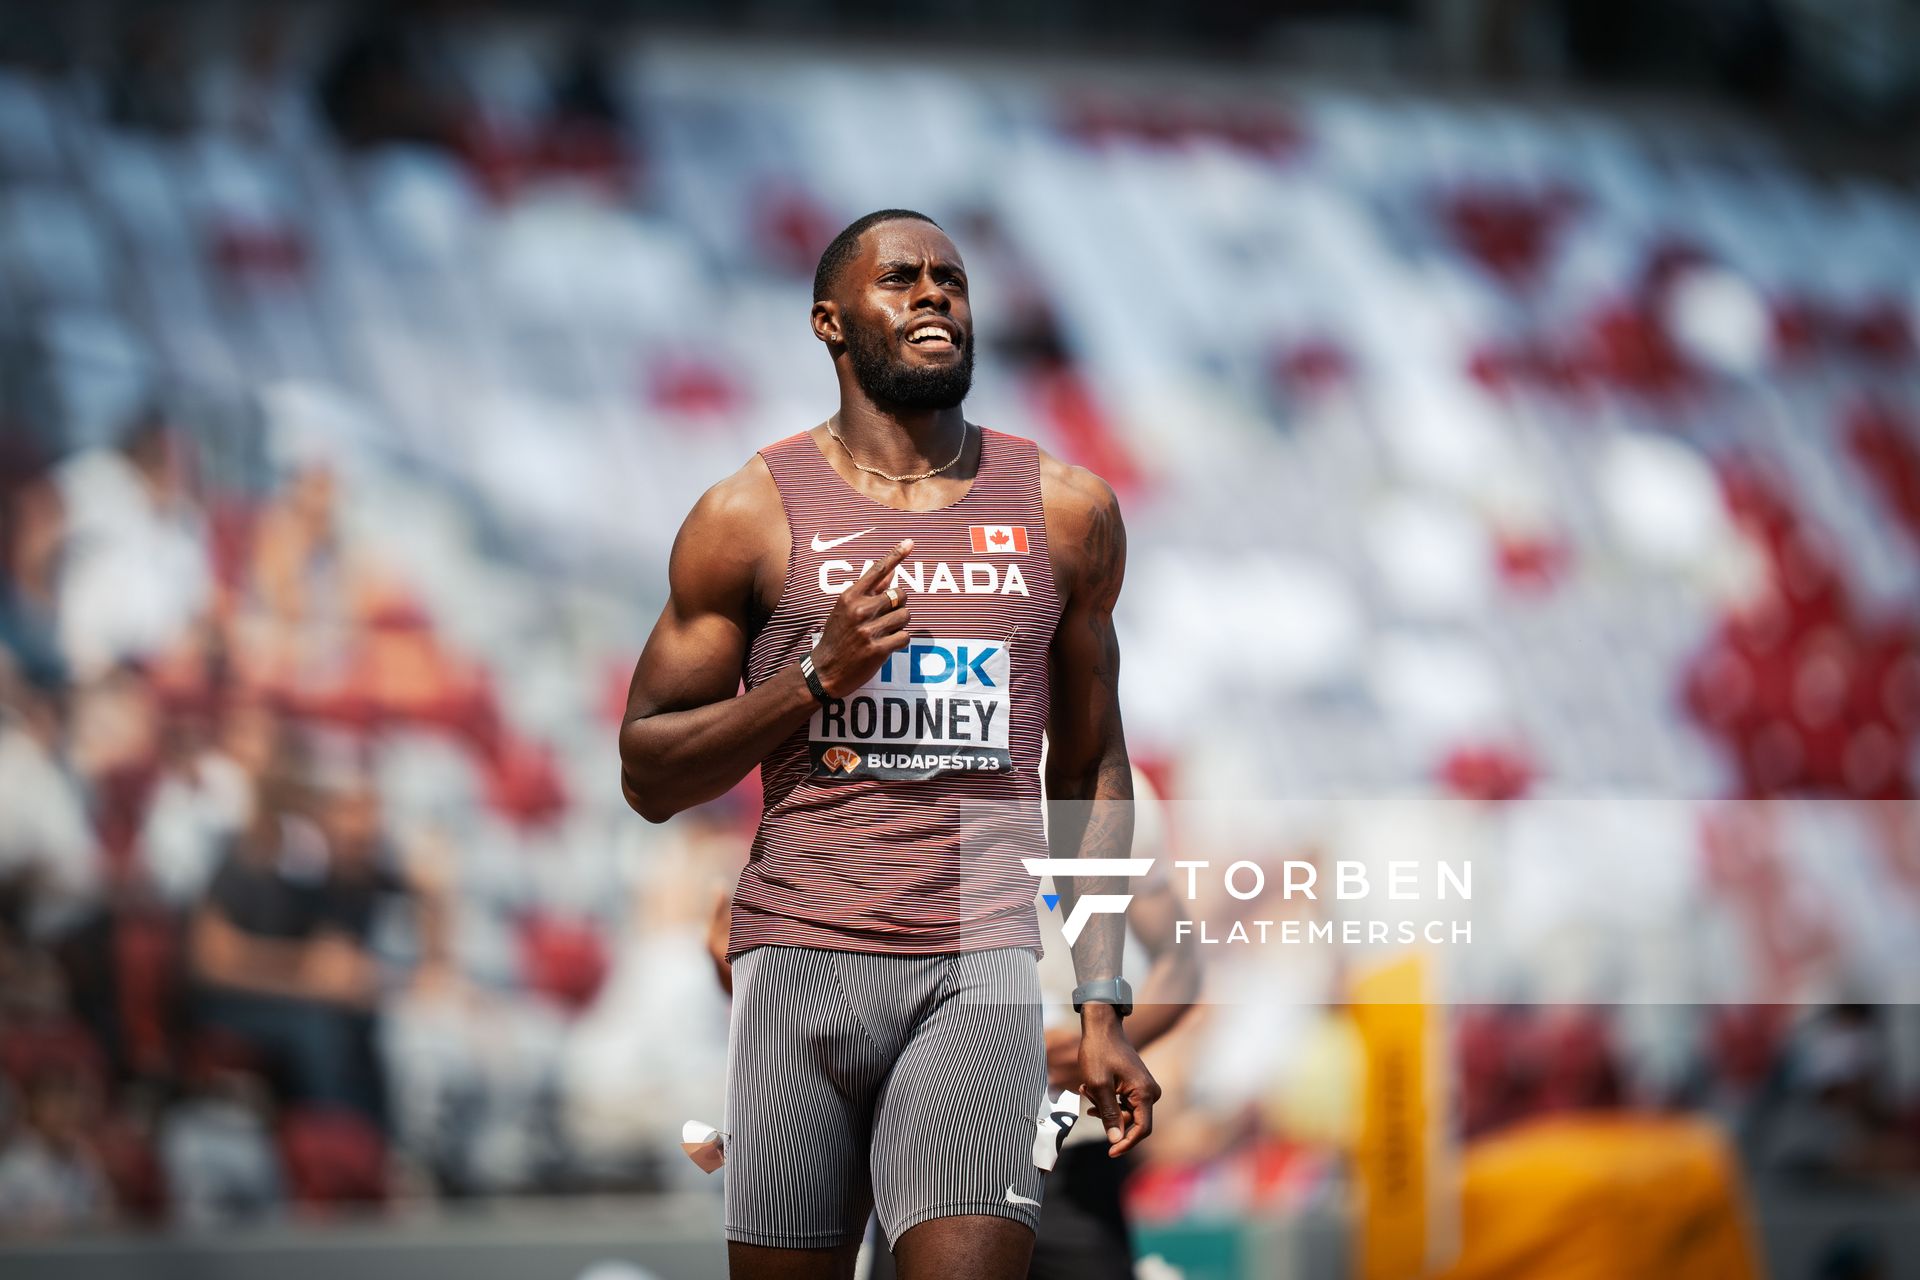 Brendon Rodney (CAN/Canada) during the 100 Metres on Day 5 of the World Athletics Championships Budapest 23 at the National Athletics Centre in Budapest, Hungary on August 23, 2023.